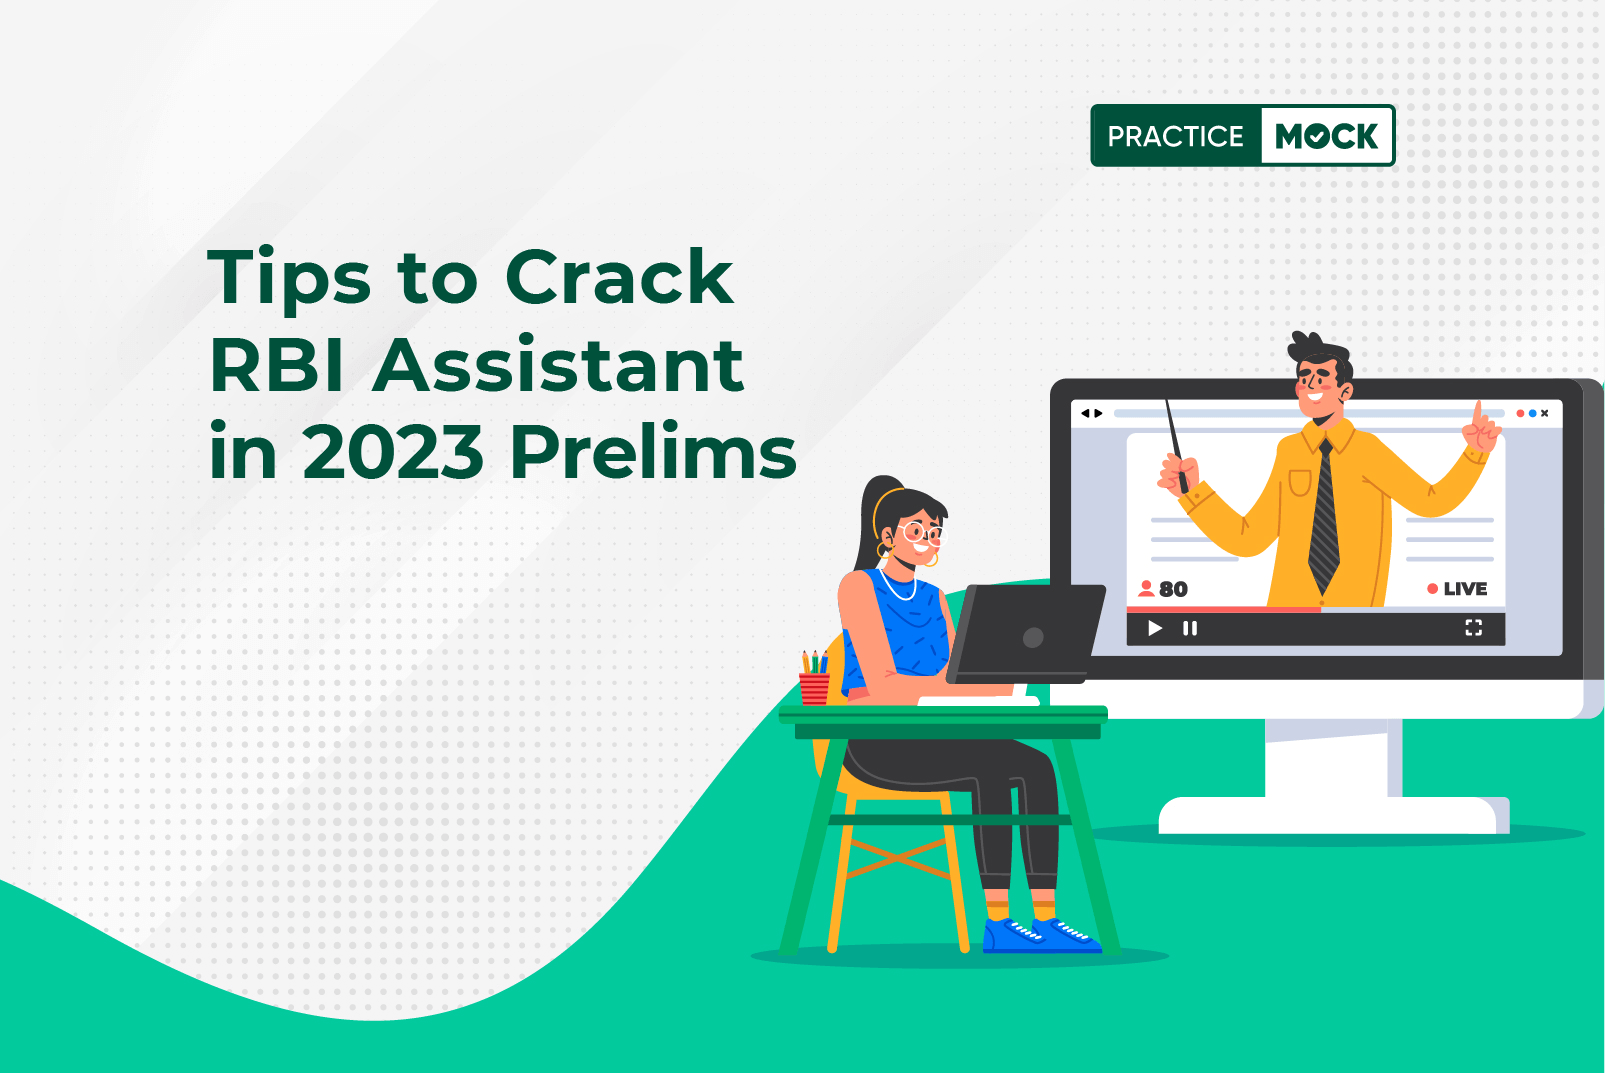 Tips to Crack RBI Assistant in 2023 Prelims